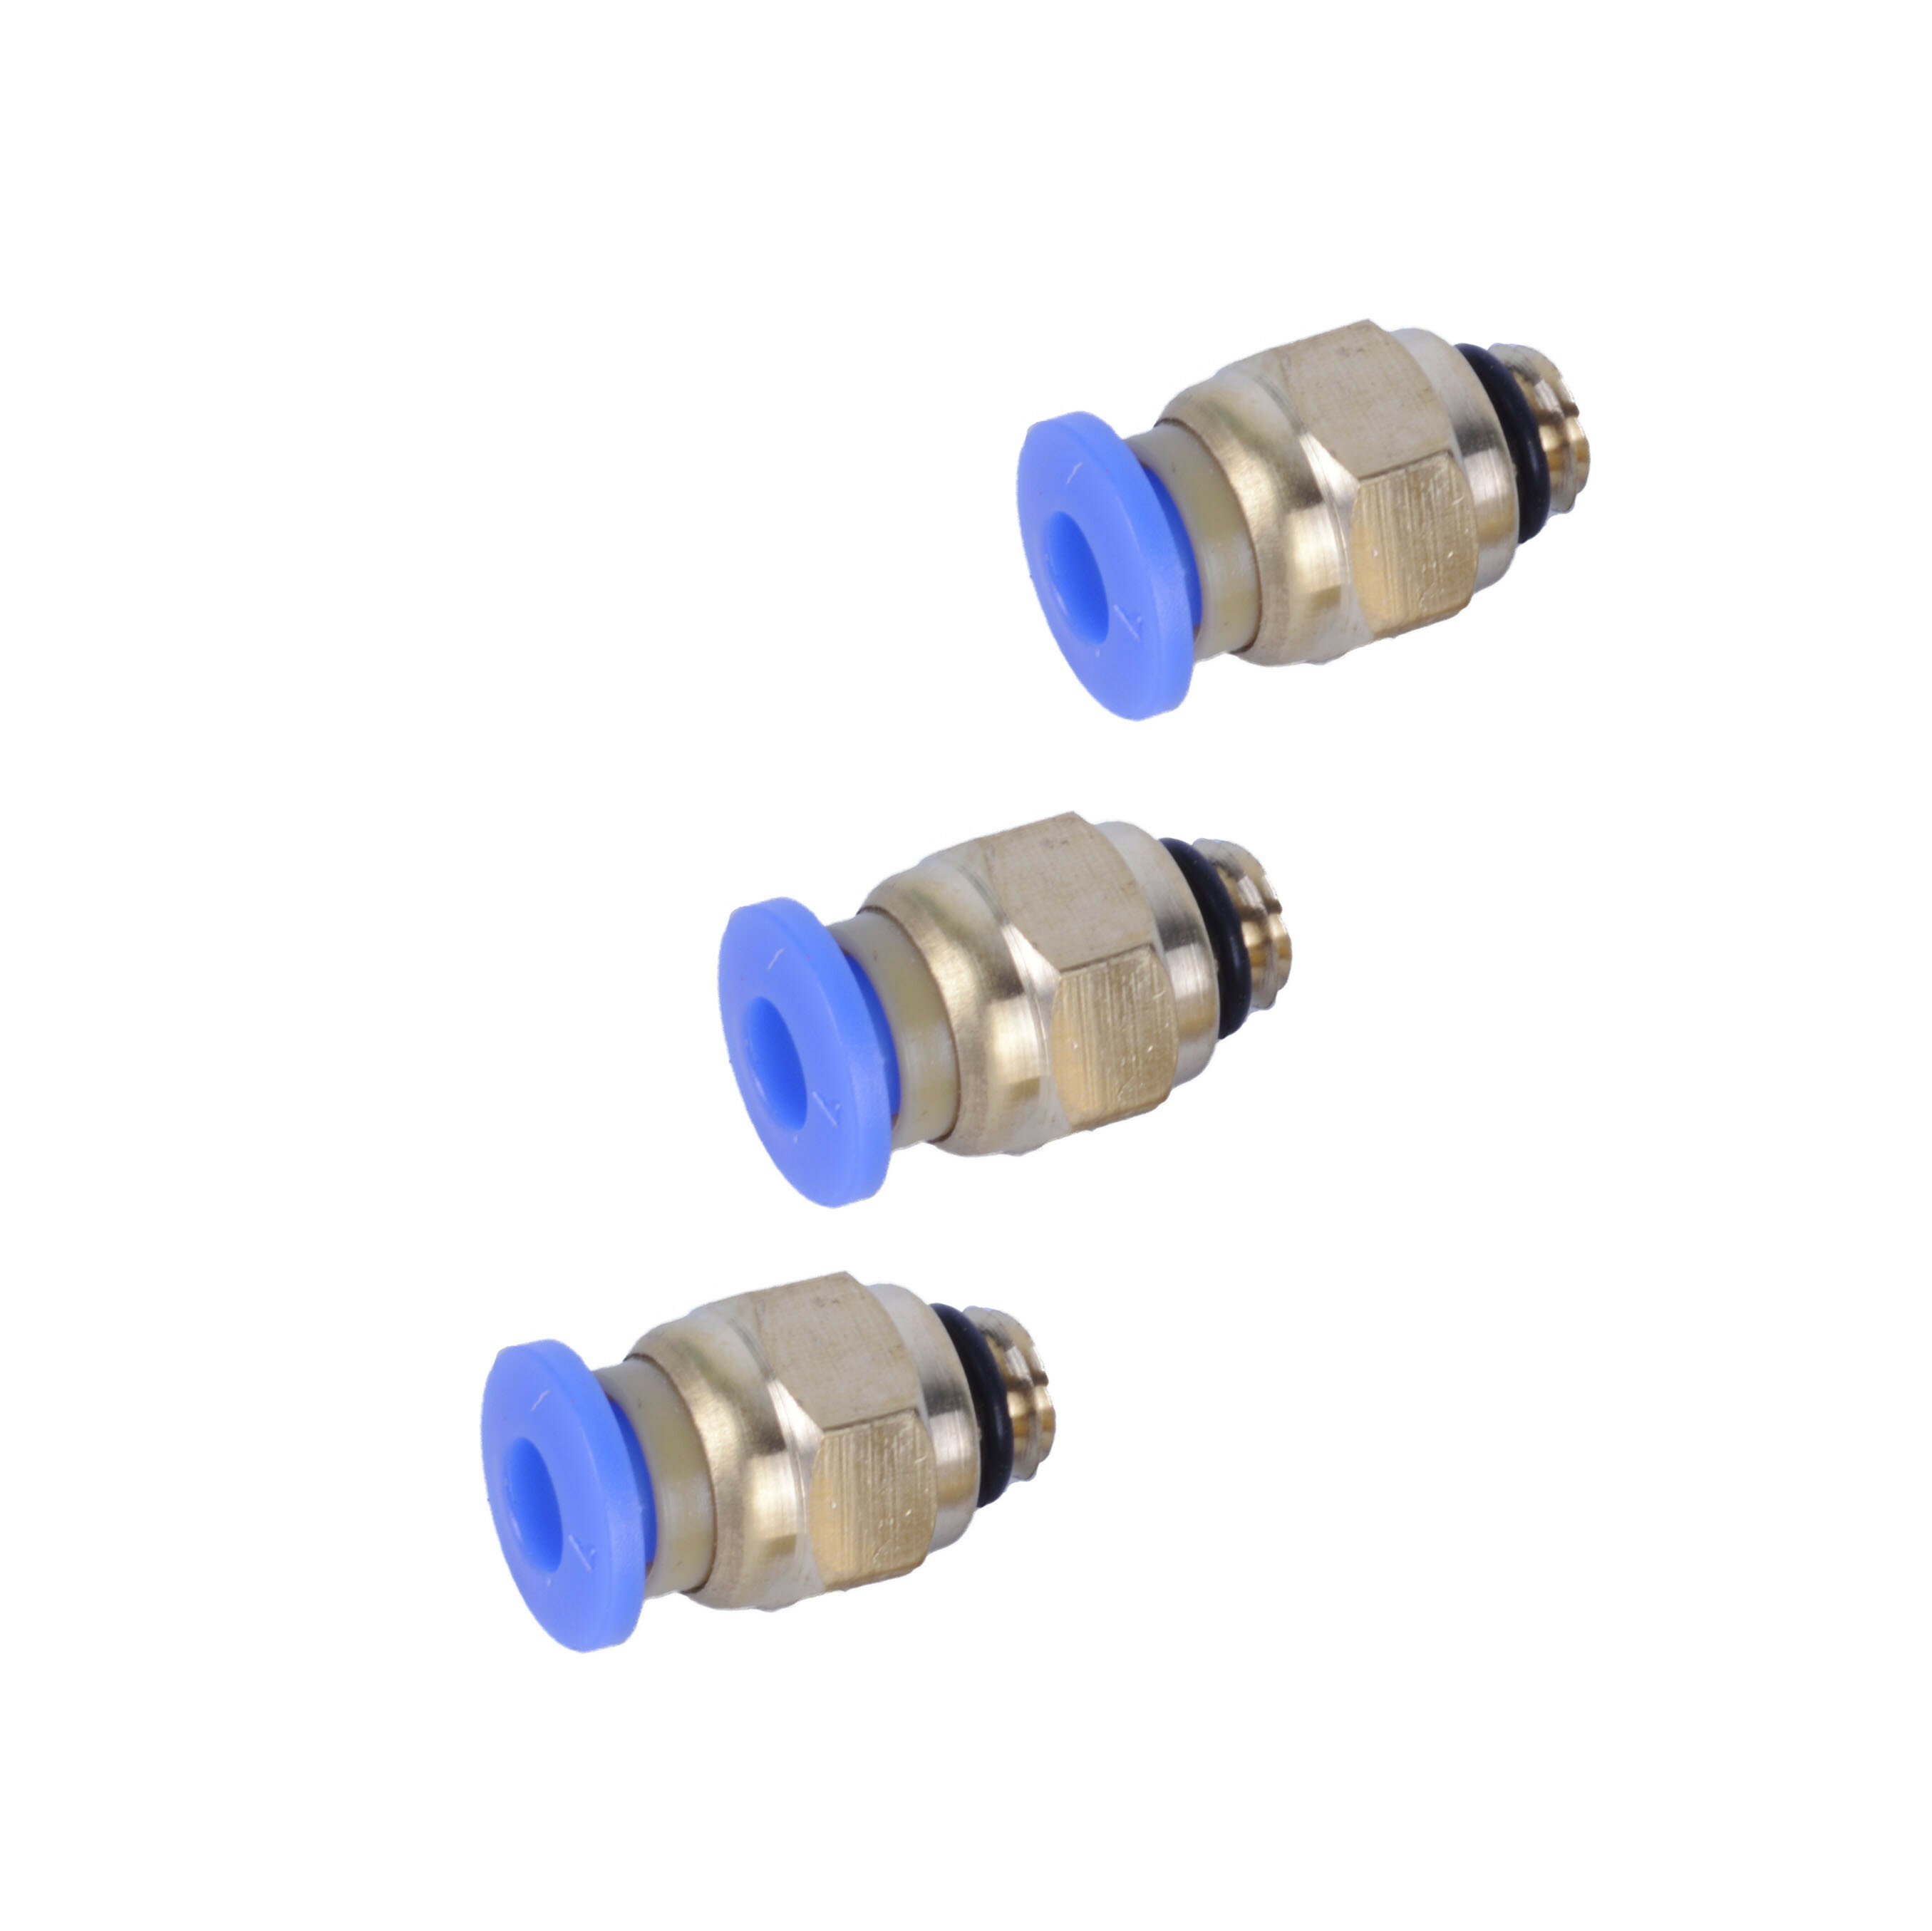 

Koonovo 5PCS Pneumatic Connectors PC4-M6 1.75mm PTFE Tube J-Head Extruder Accessories Fitting for Ender 3/CR-10 3D Print